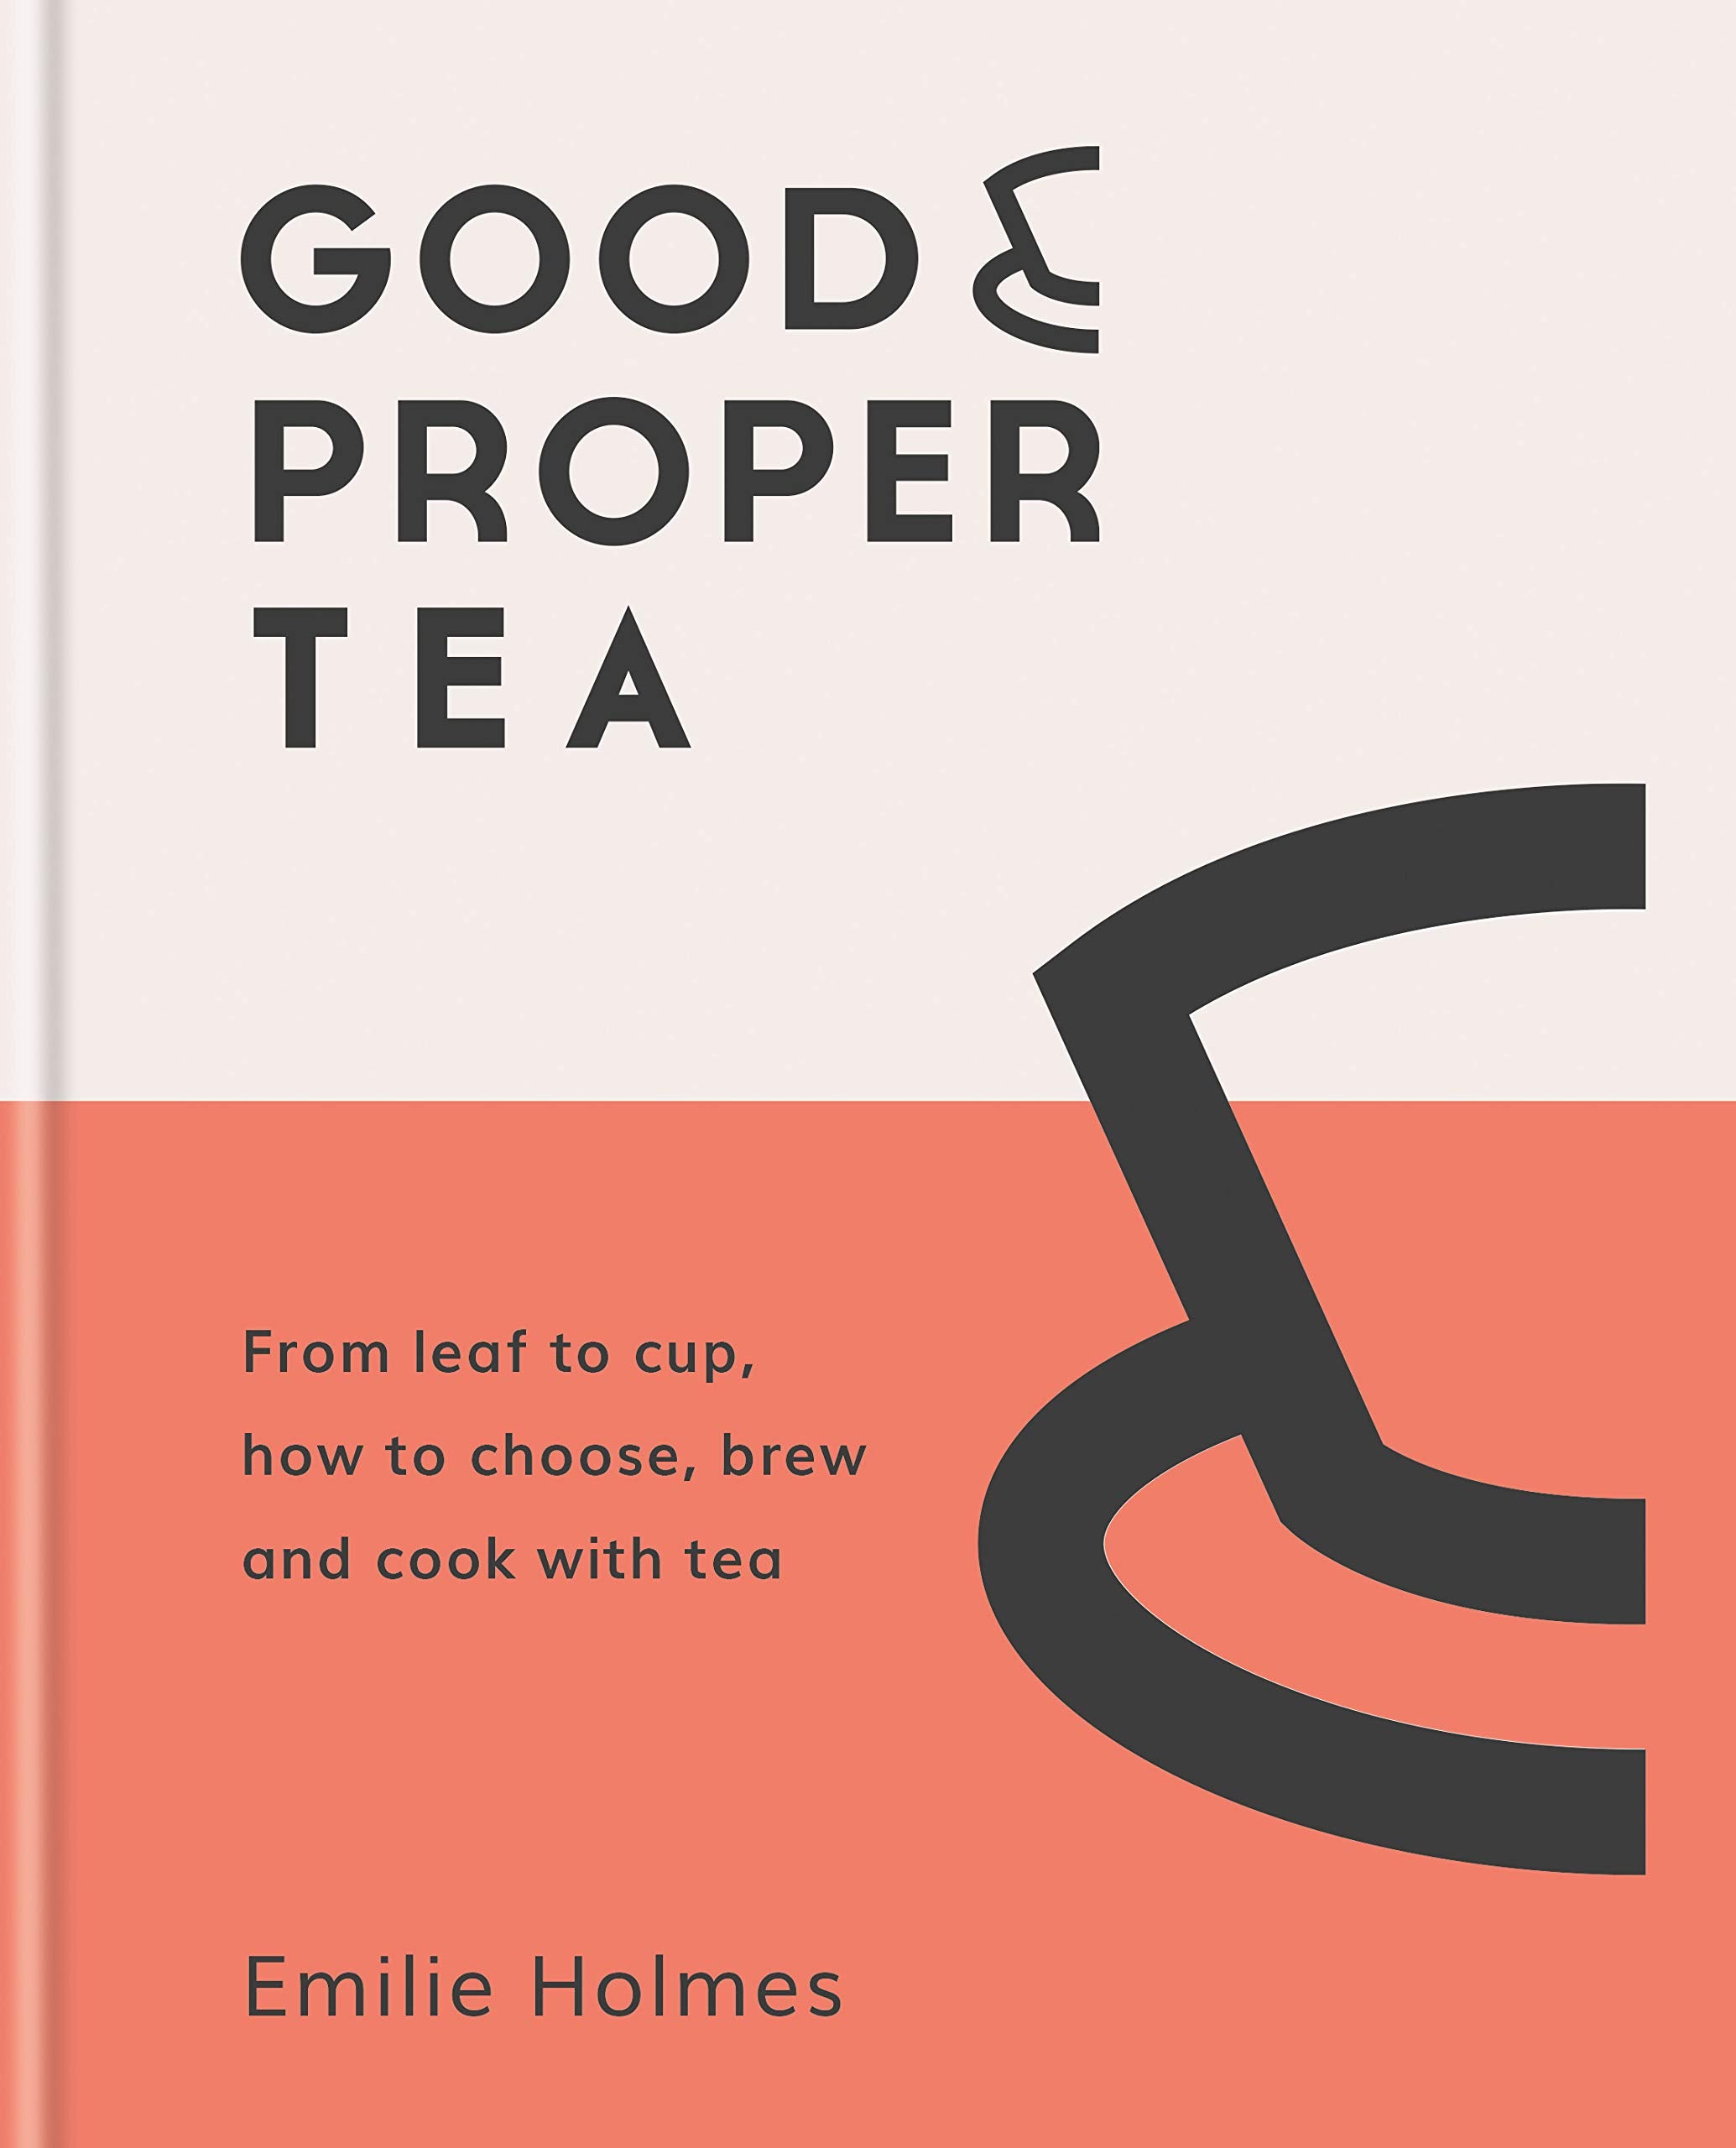 Good & Proper Tea: How to Make, Drink and Cook with Tea (Emilie Holmes)